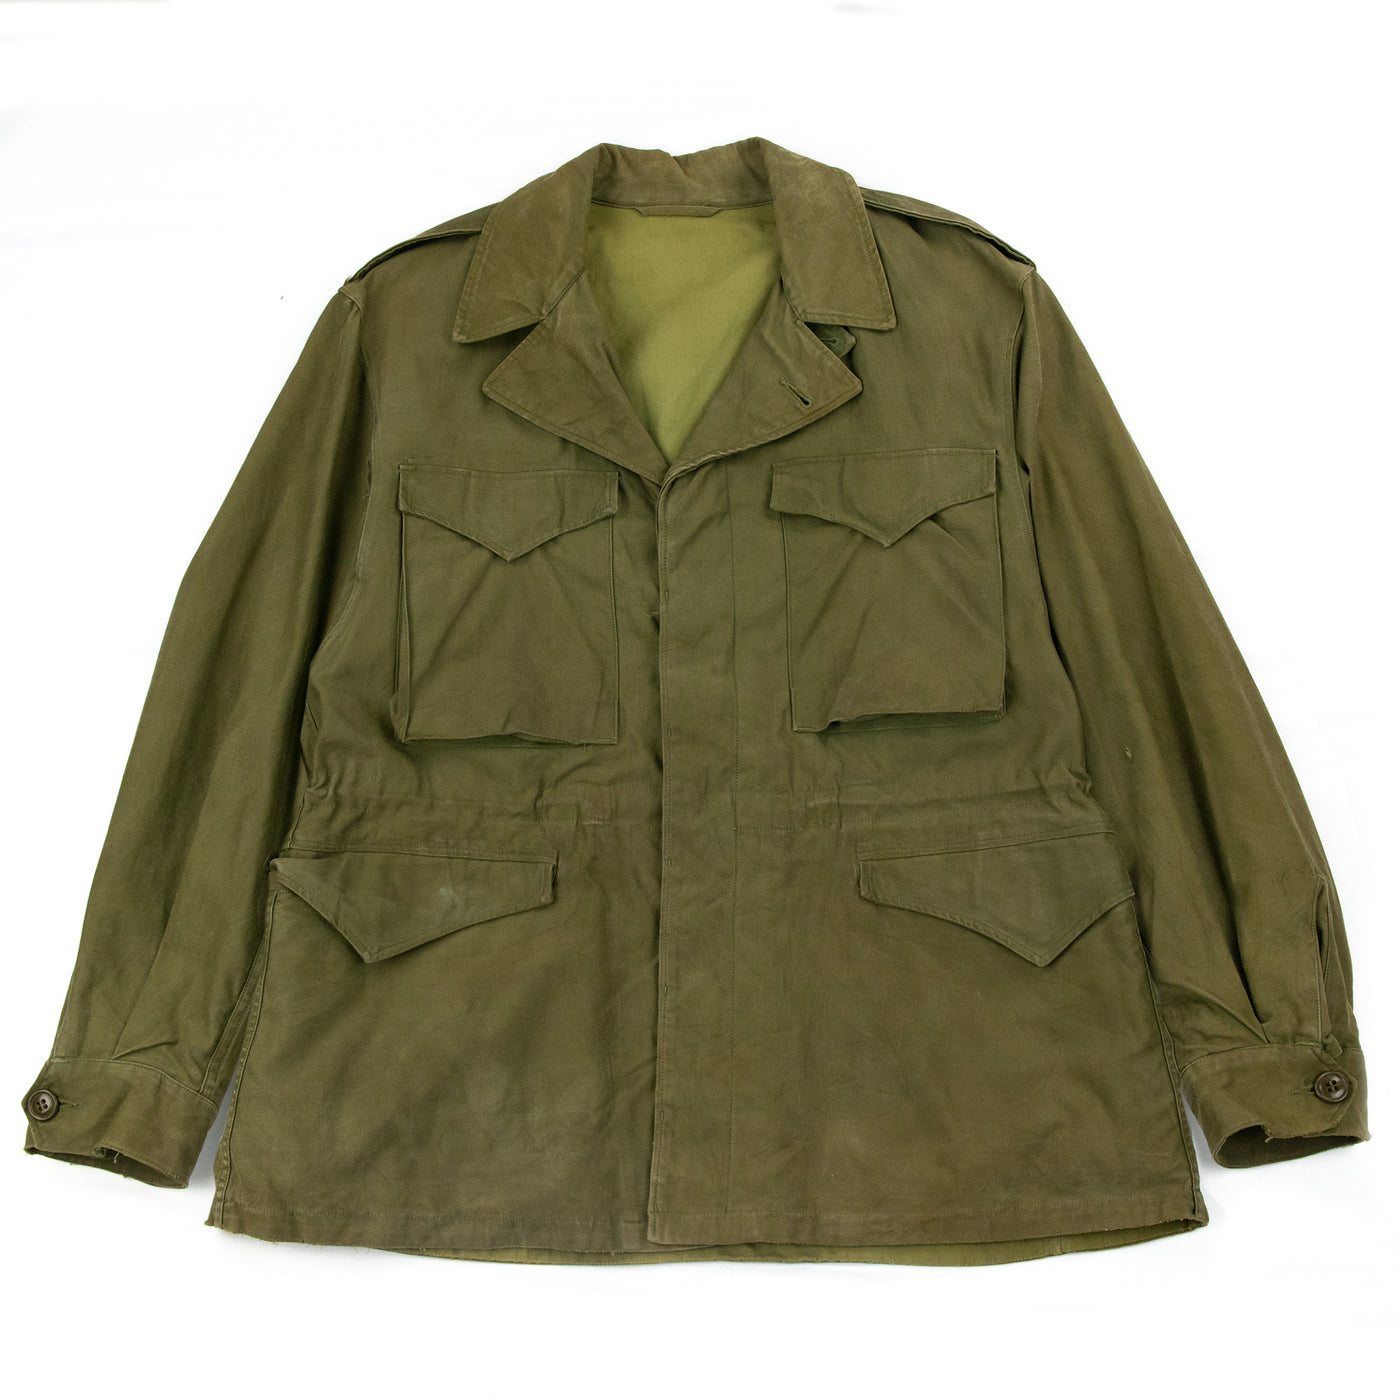 Vintage 1940s M-1943 US Army WWII Military Field Jacket Olive Green - M Front